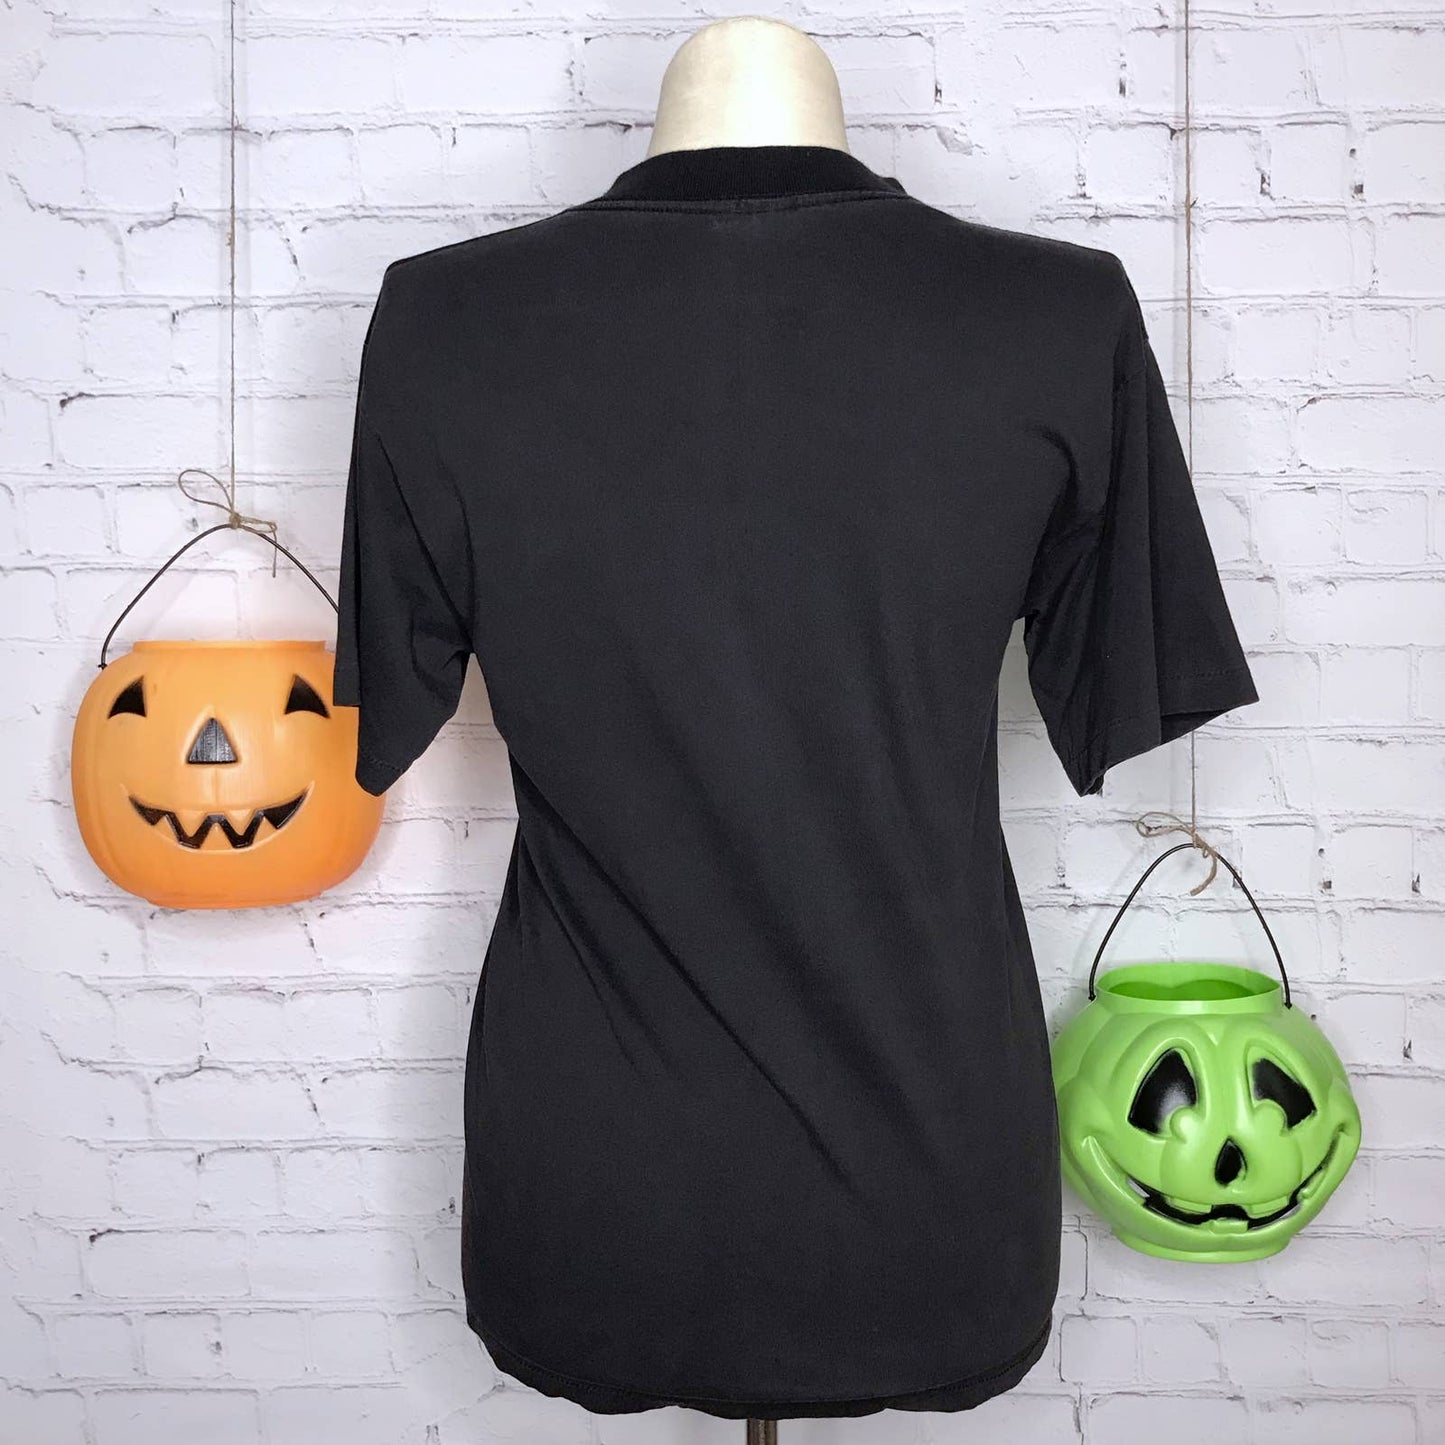 Vintage 90s Black Tee This Is My Halloween Costume by Stadium Court Size L